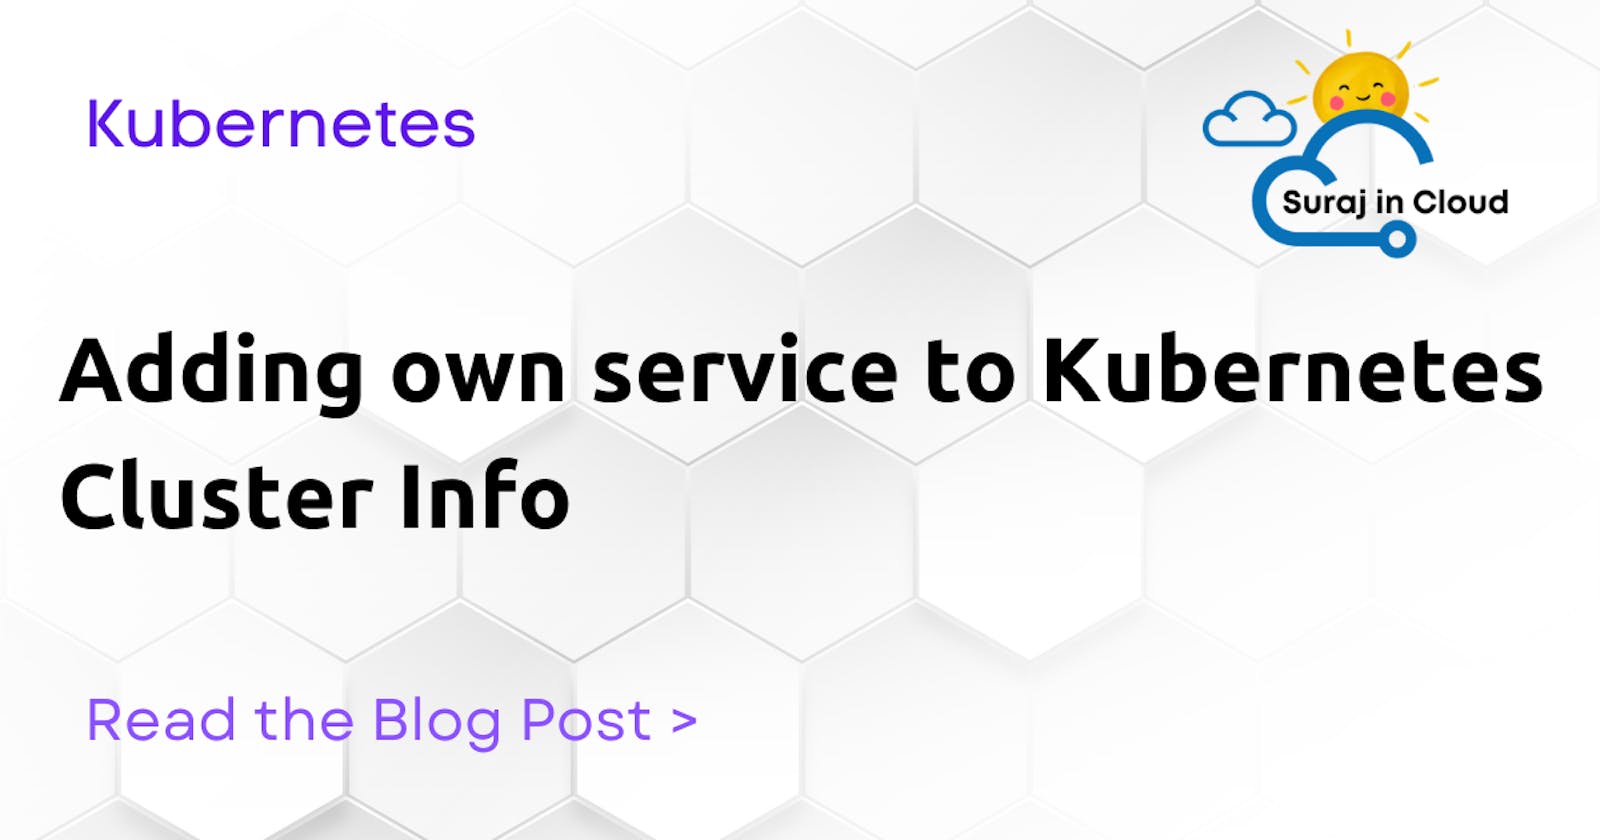 Adding own service to Kubernetes Cluster Info